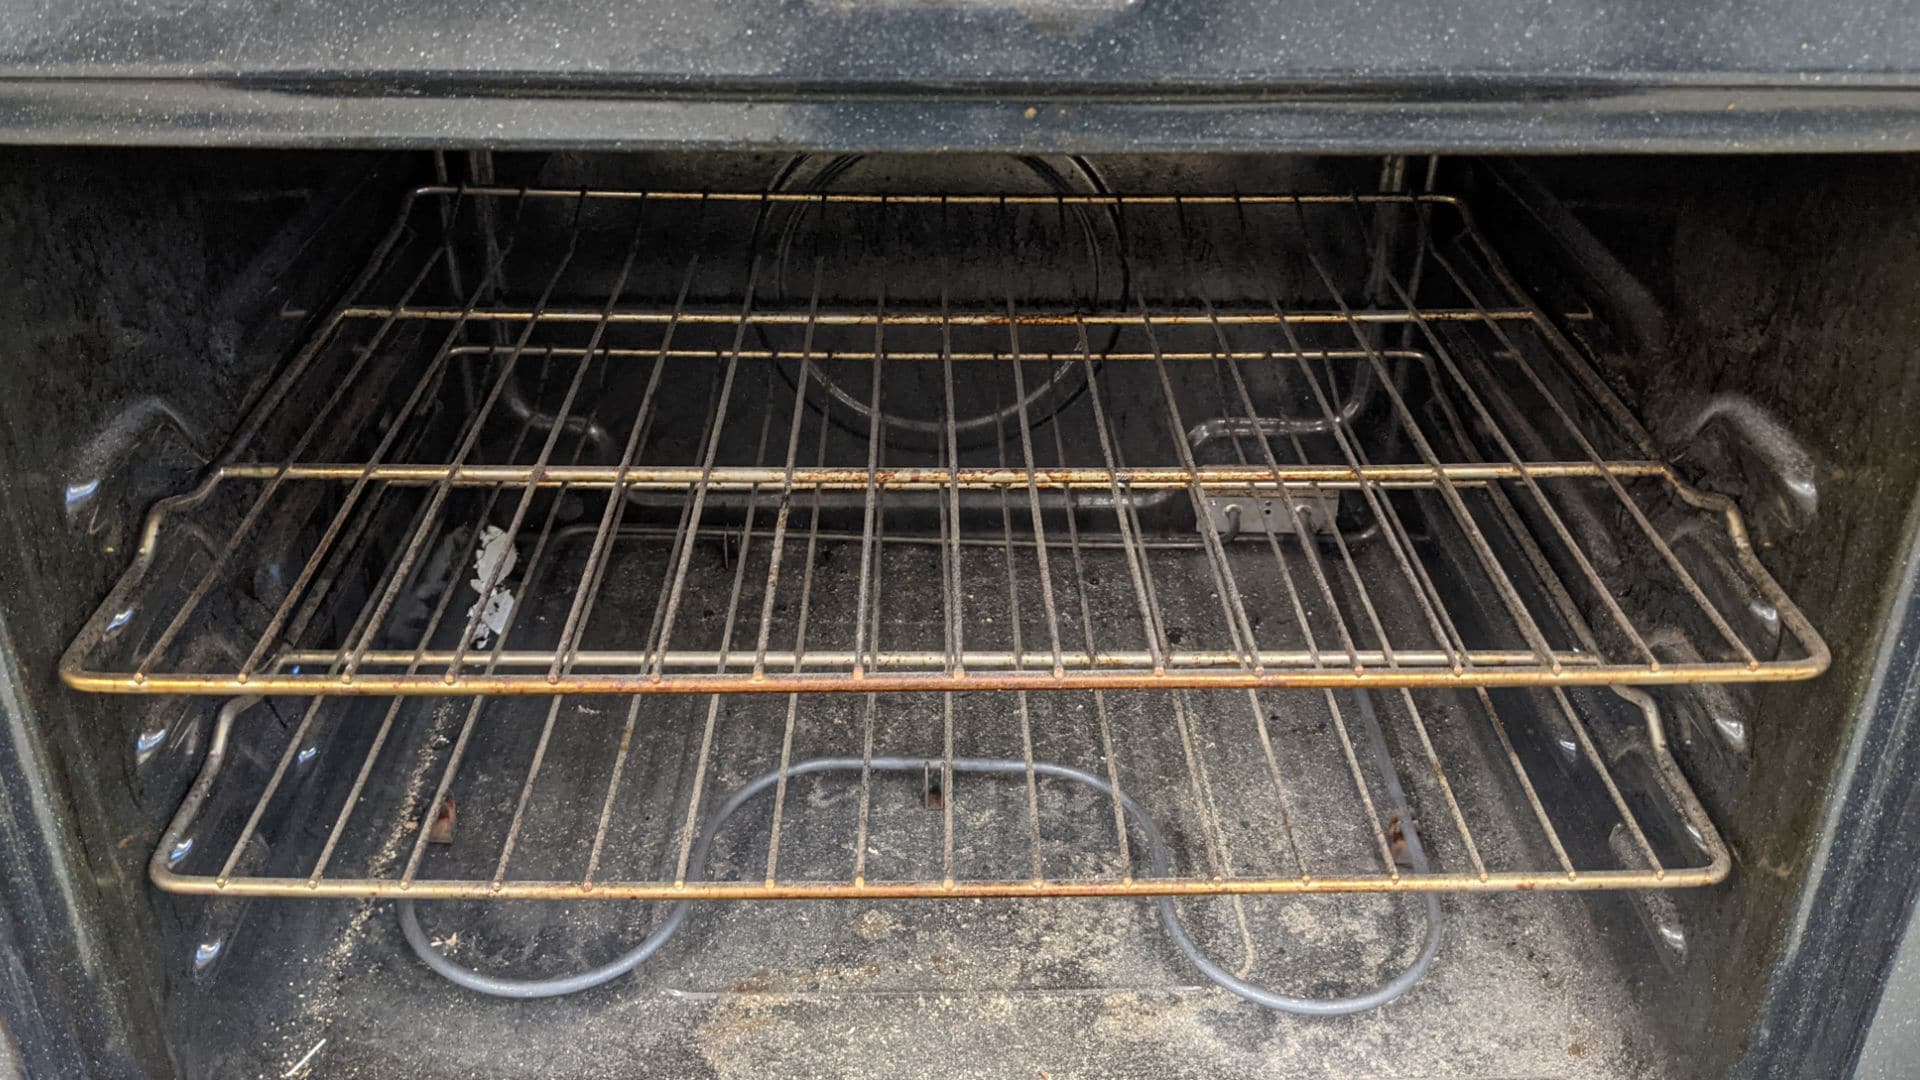 How To Replace a Broken Stove Heating Element 